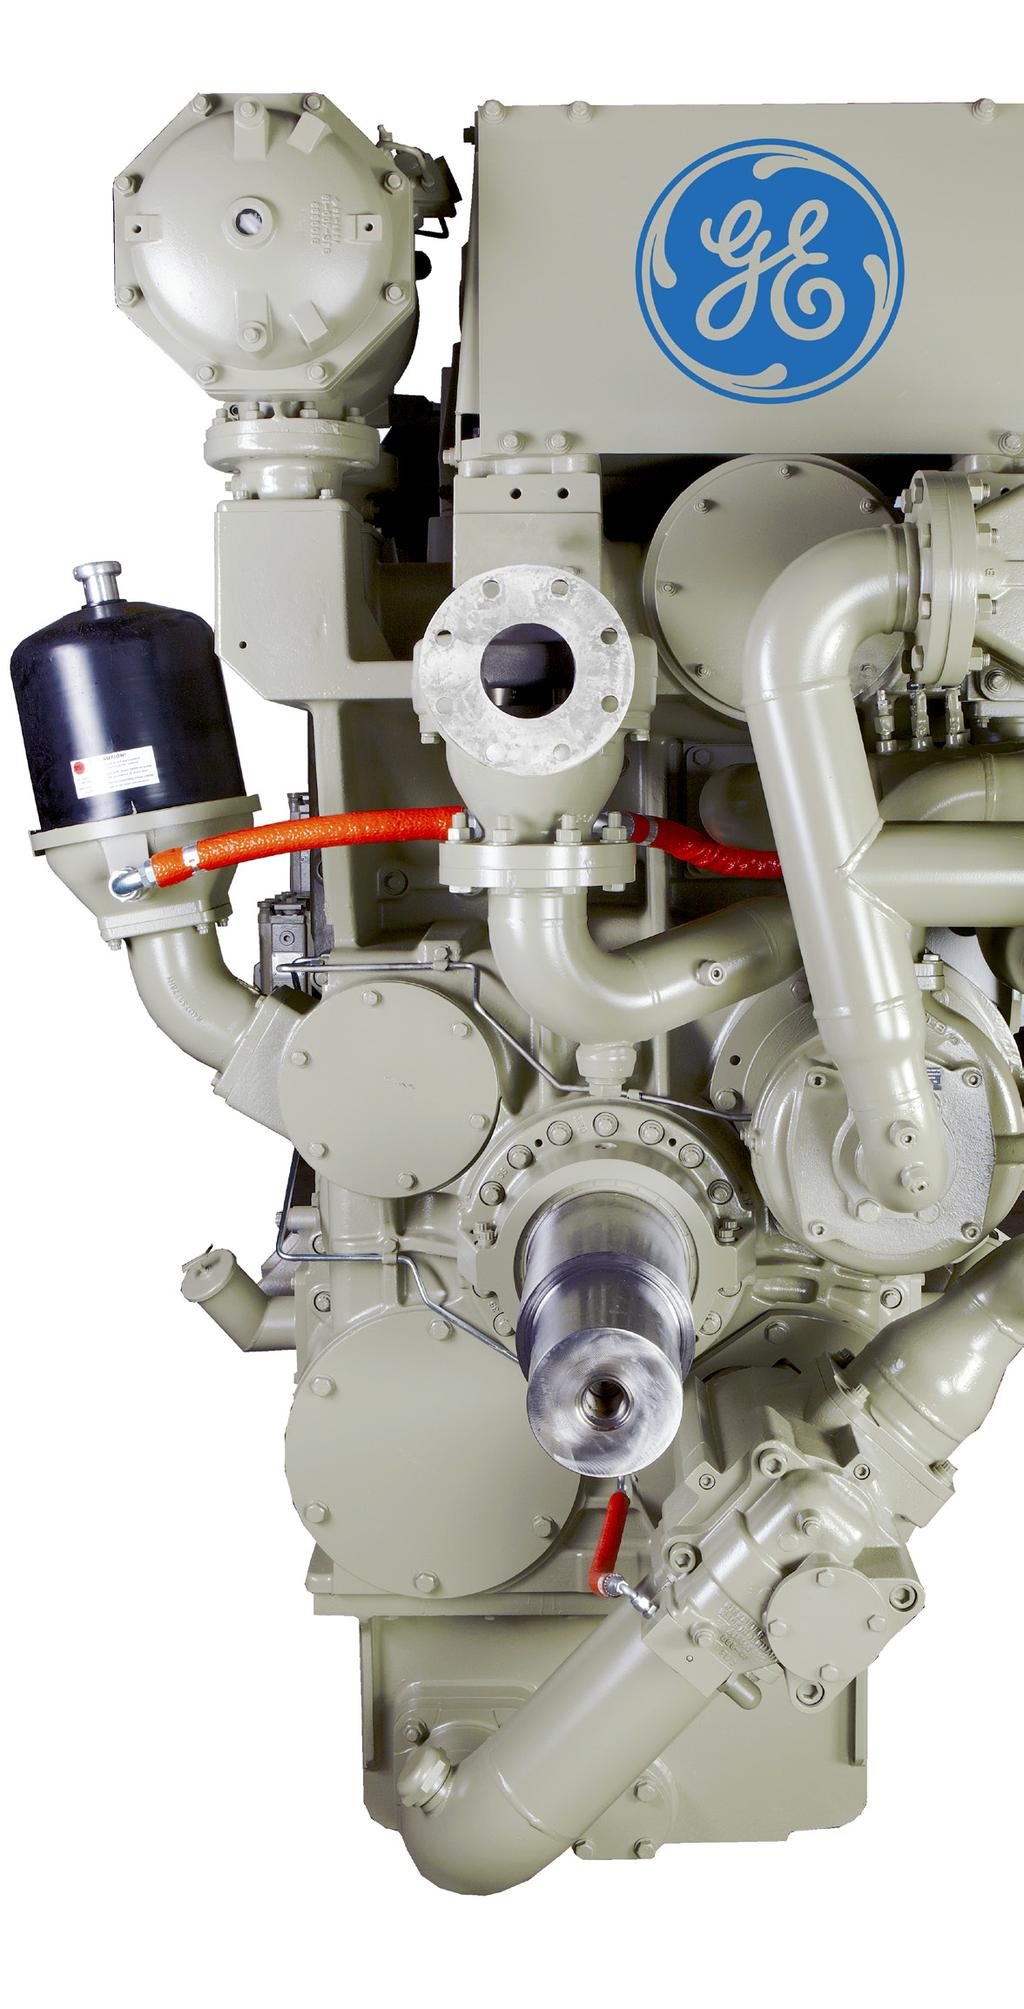 A World Leader in Manufacturing Diesel Engines For over 40 years, GE Marine has built dependable, longlasting, and fuel-efficient medium-speed diesel engines.